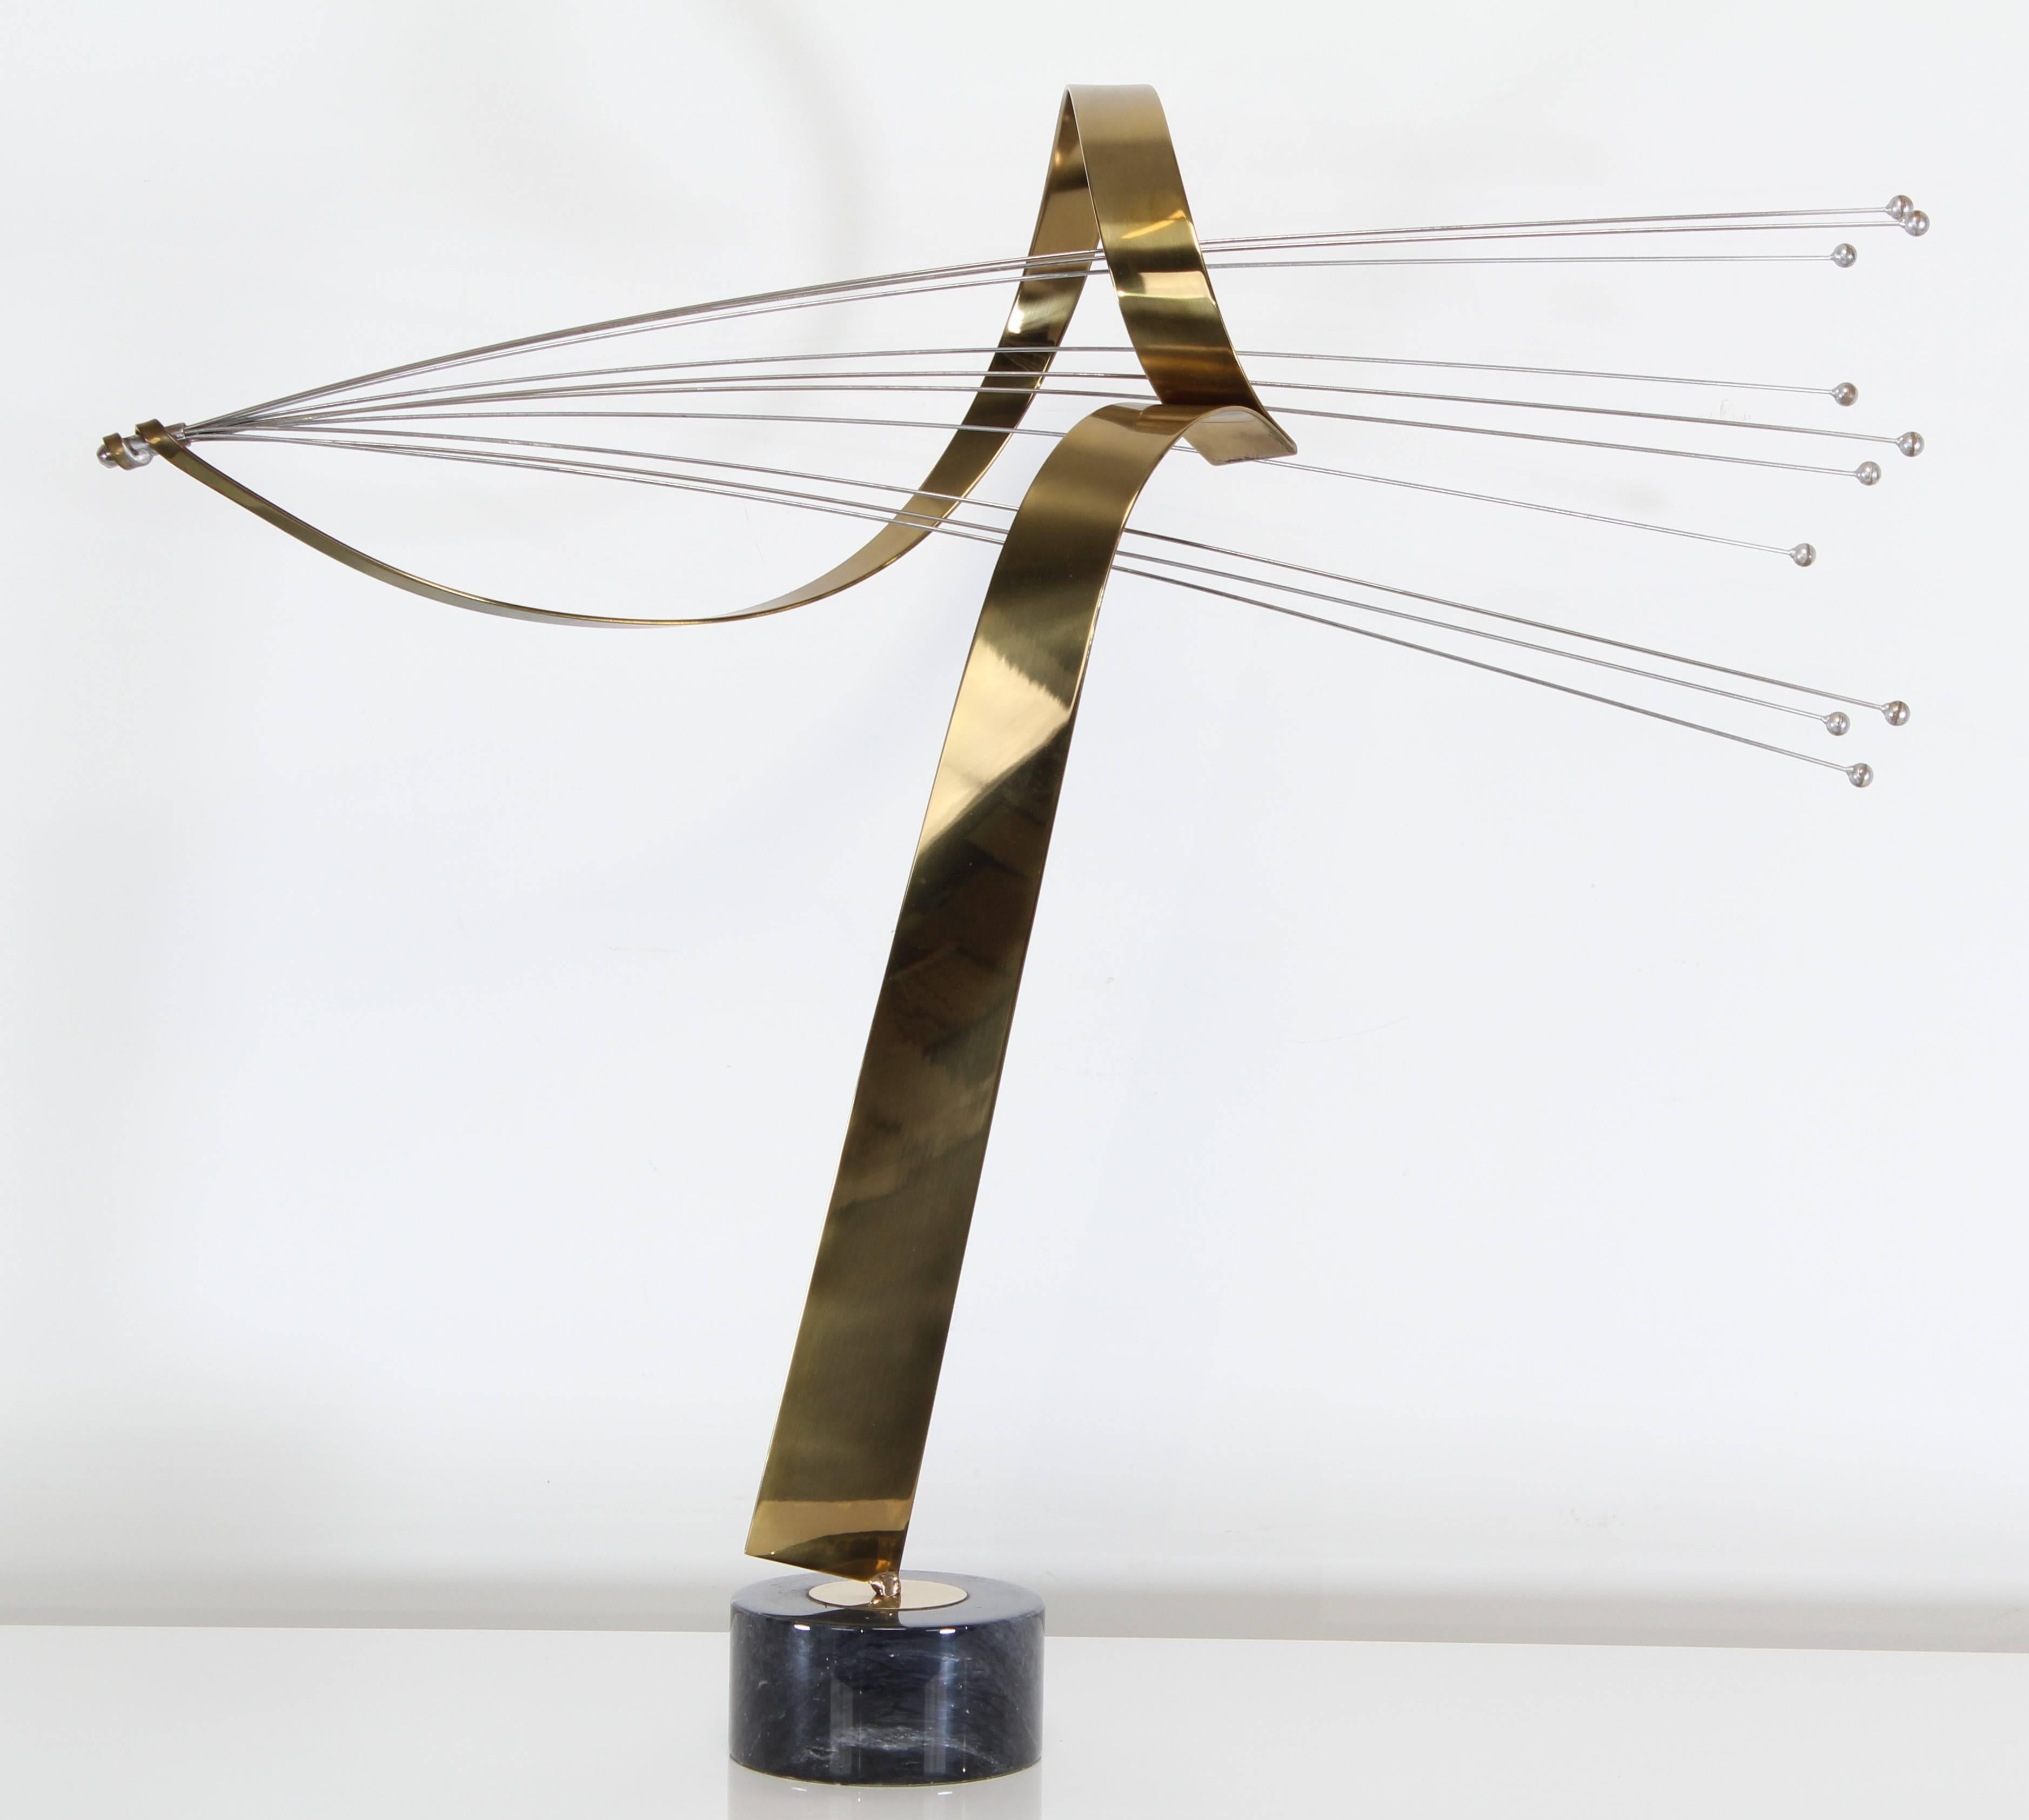 A large steel and brass abstract sculpture with multi rod spray and ribbon design on a black marble pedestal base by Curtis Jere.

Dimensions: 32